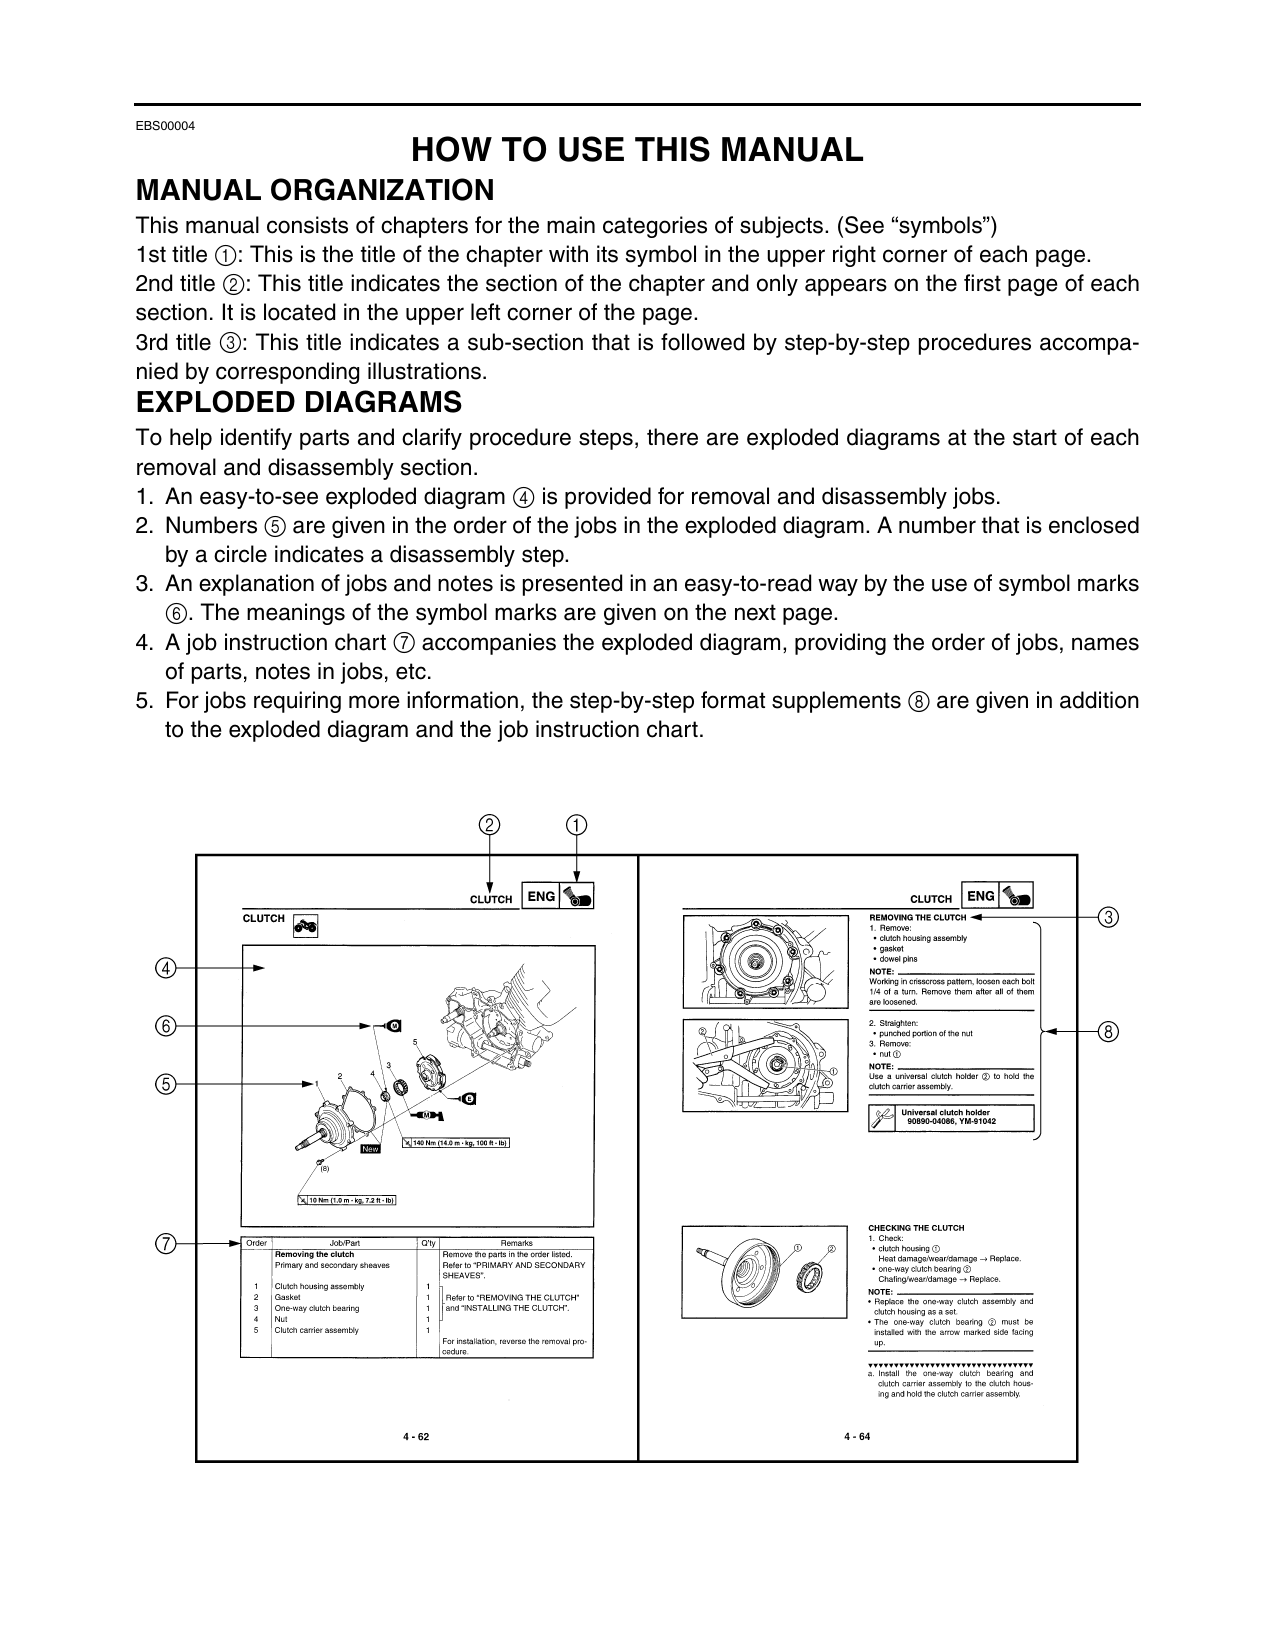 2007-2011 Yamaha Grizzly IRS Auto, YFM 350, 4x4 service manual Preview image 4